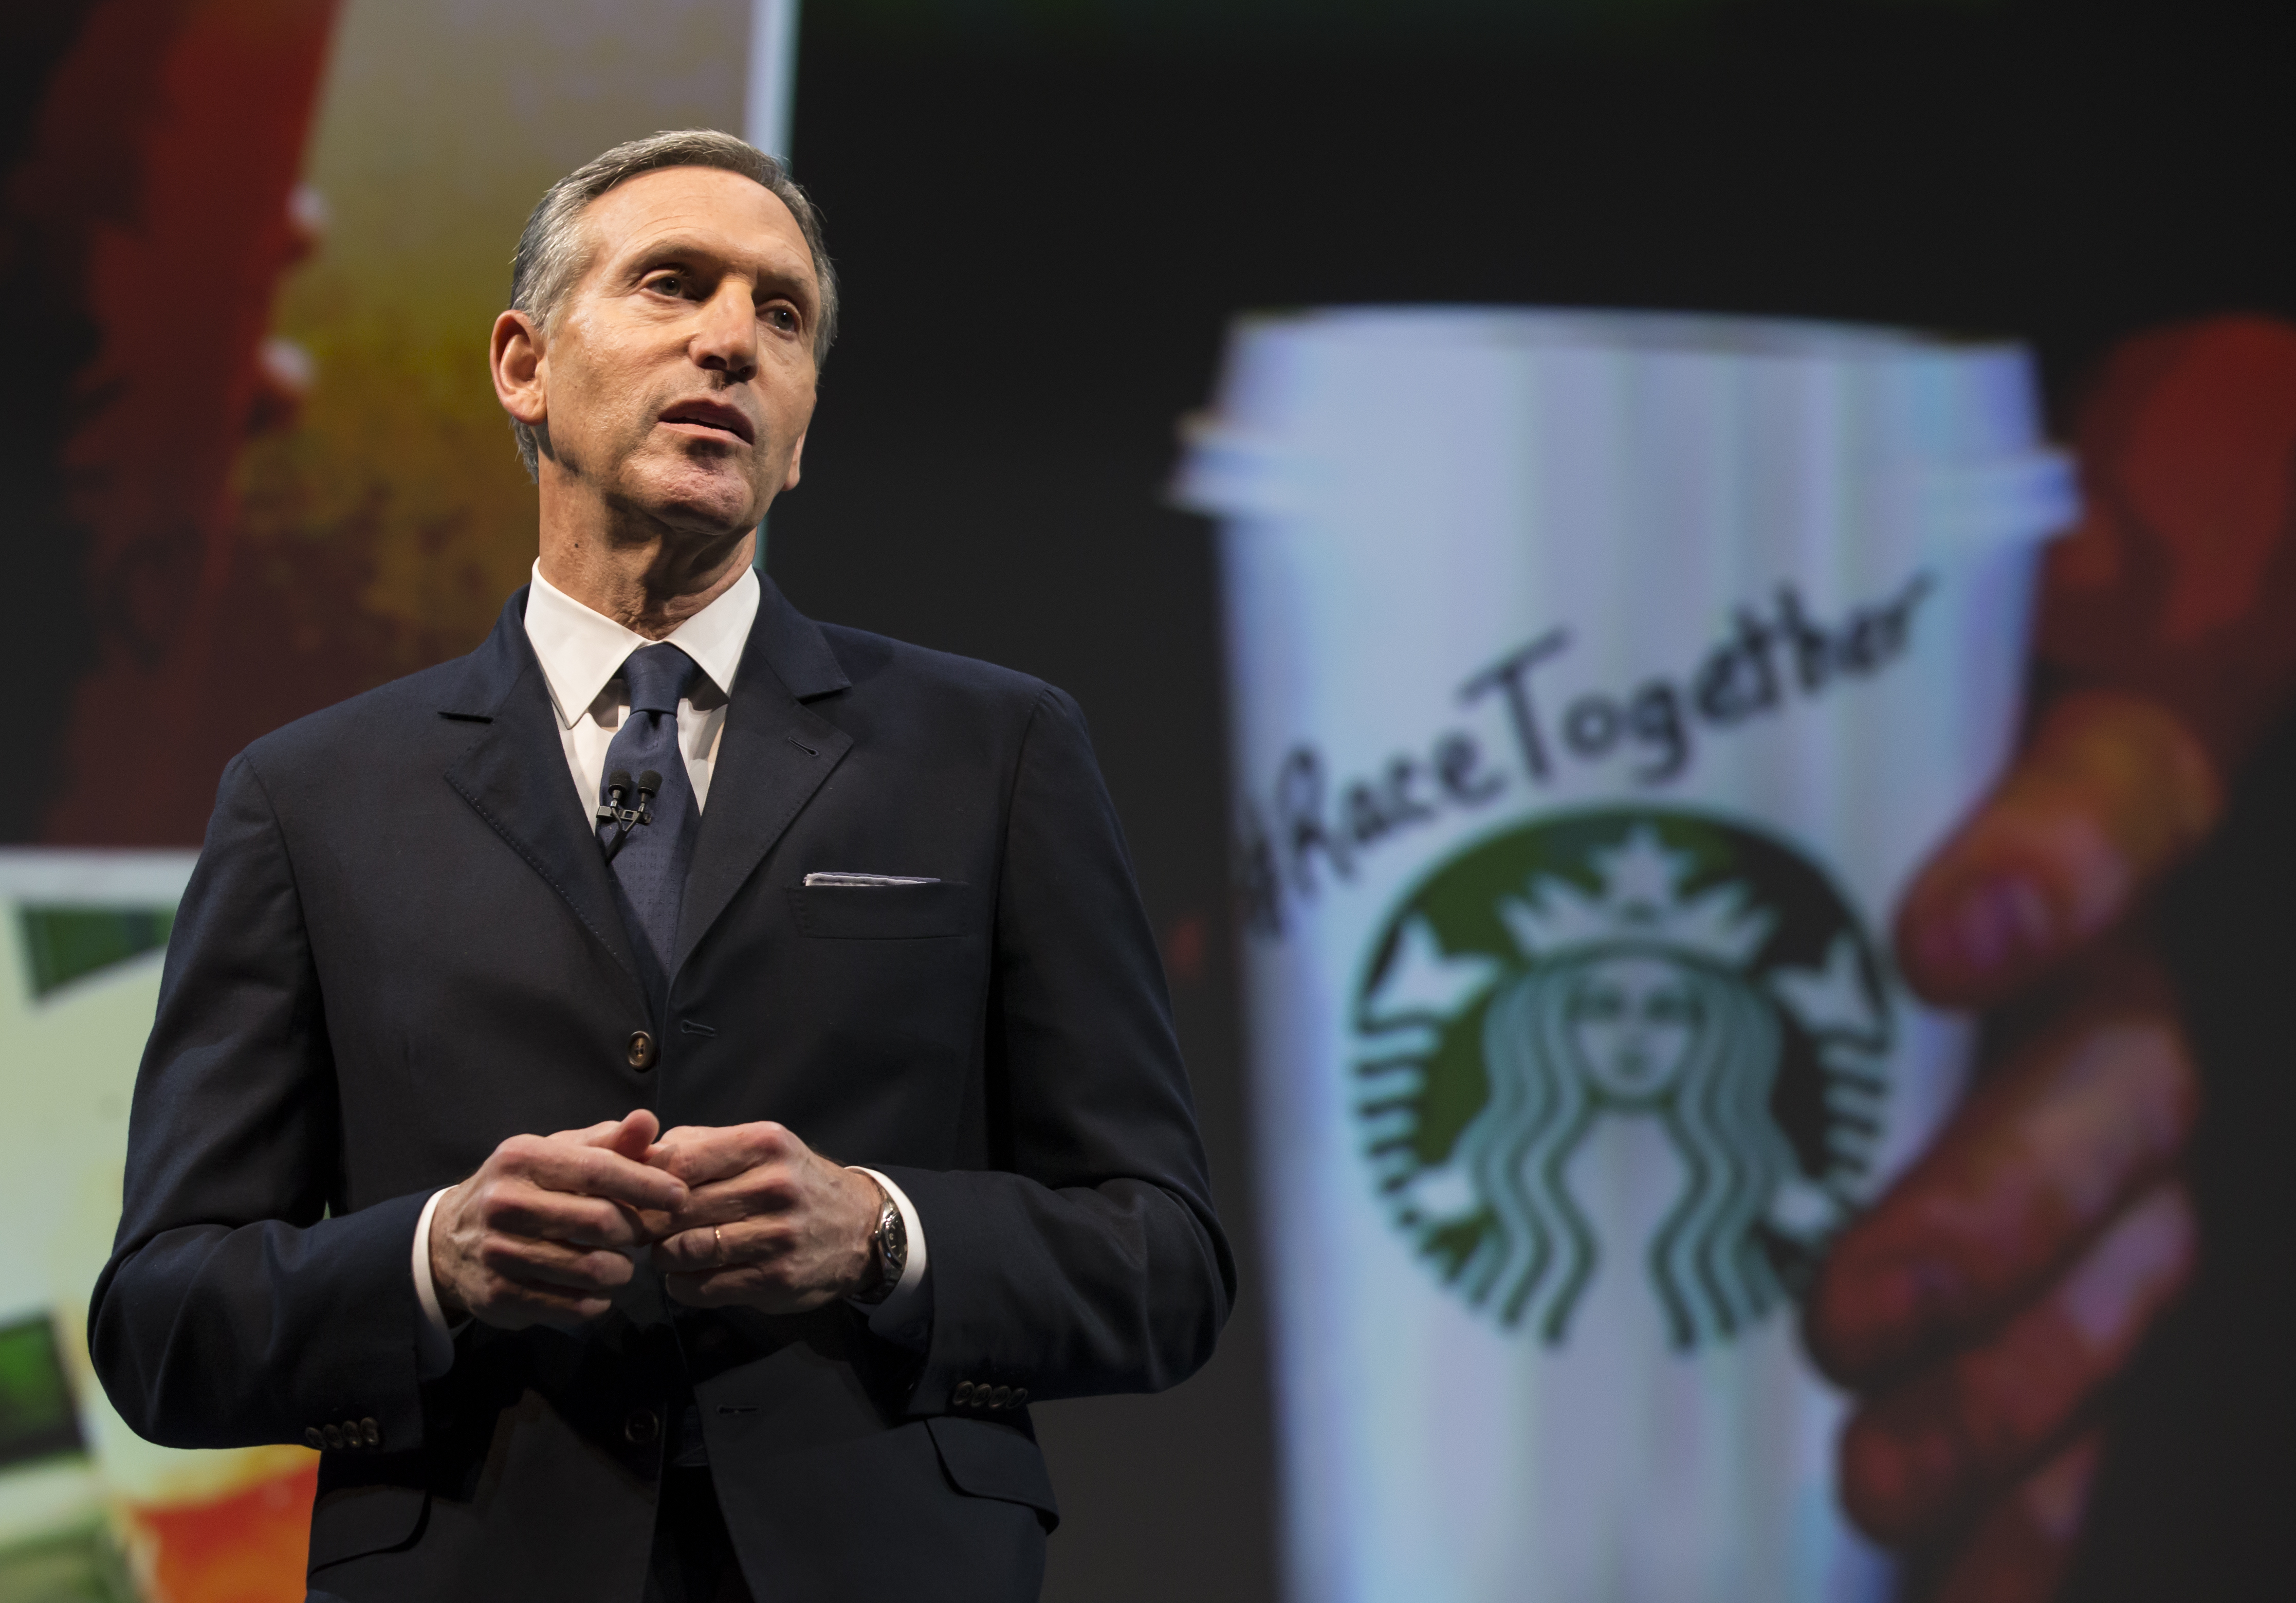 Starbucks Chairman and CEO Howard Schultz addresses the "Race Together Program" during the Starbucks annual shareholders meeting  on March 18, 2015 in Seattle, Wash. (Stephen Brashear&mdash;Getty Images)